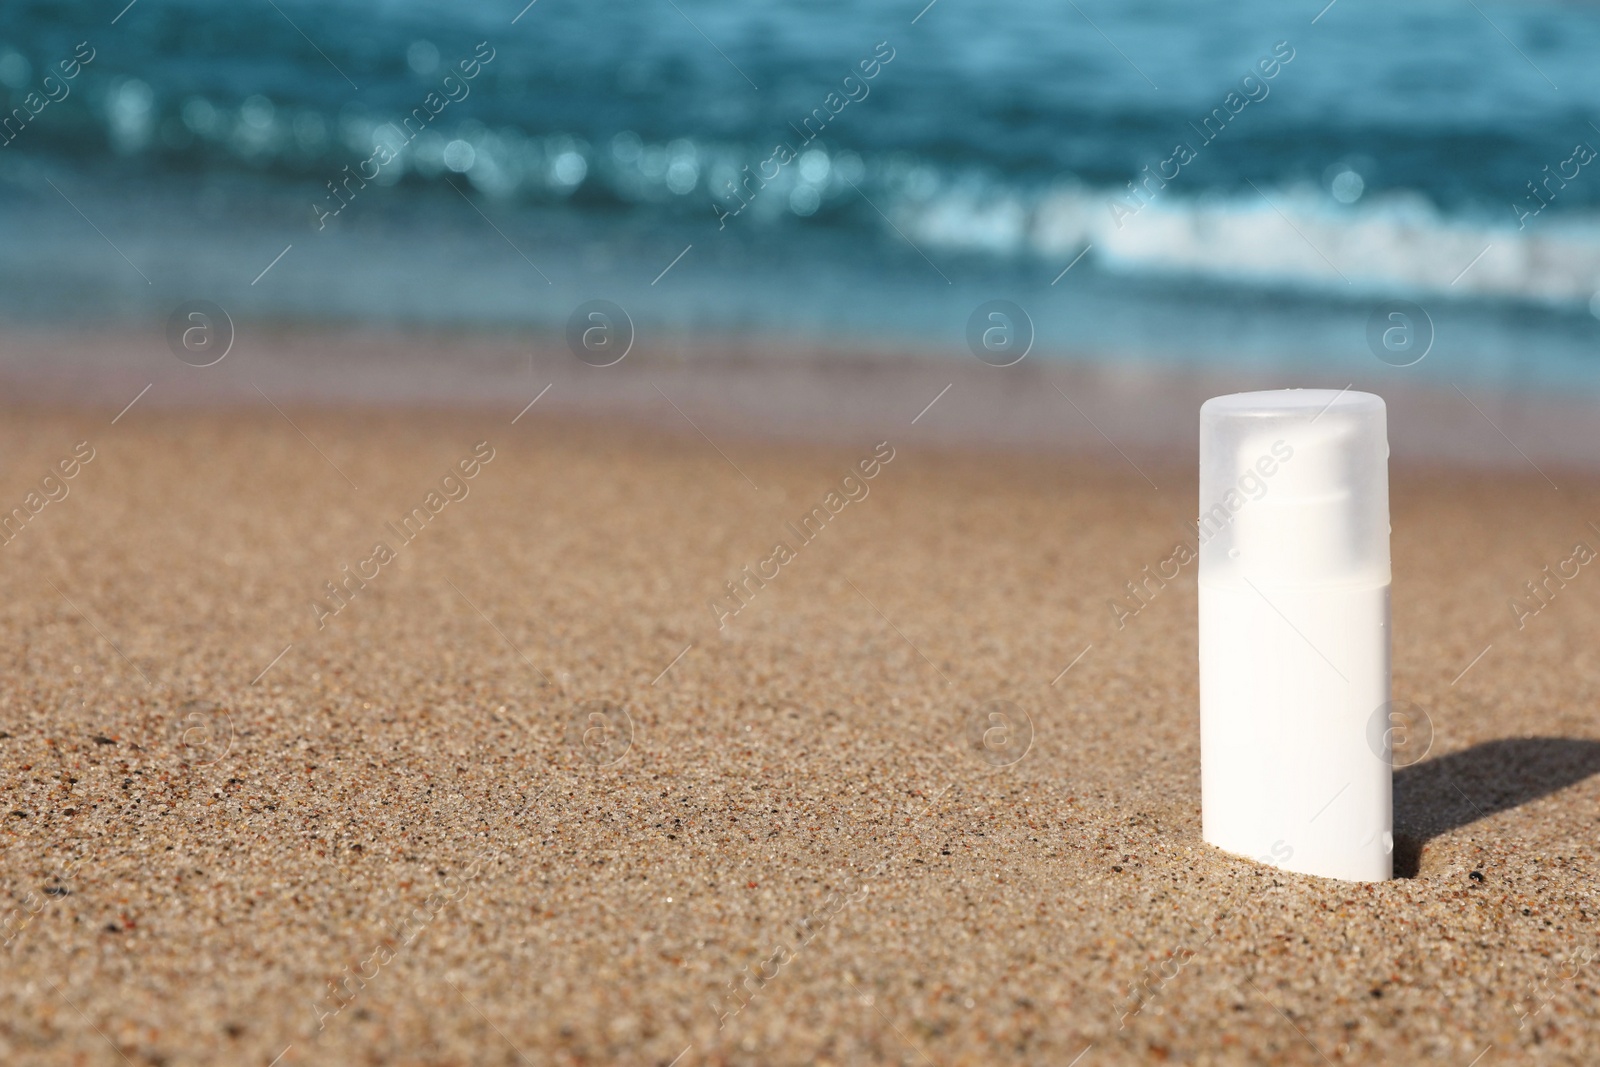 Photo of Blank white bottle of sunscreen on sand near sea, space for text